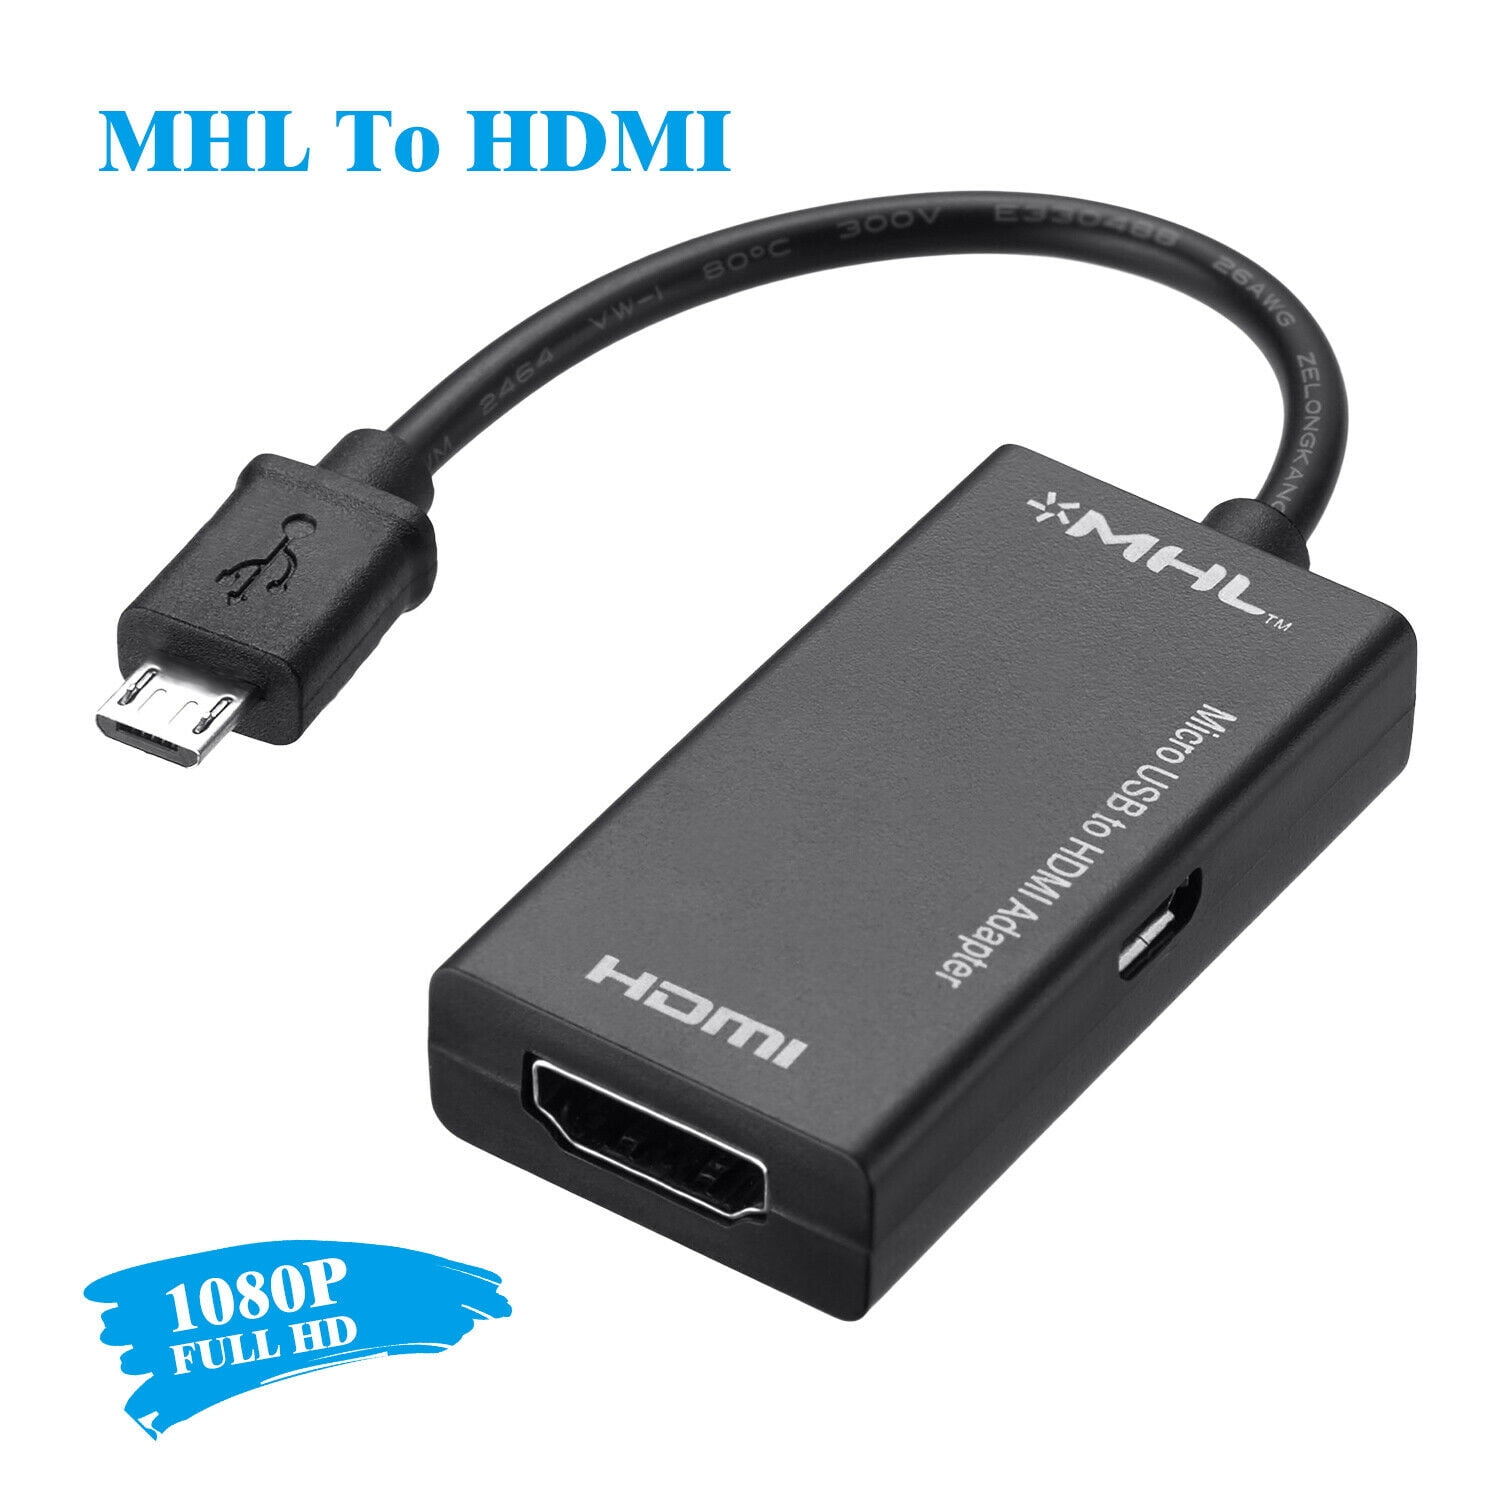 MHL to HDMI Adapter HDTV 1080P High Resolution Cable for Android Samsung Smart Phone & Tablet with MHL Function Black Micro USB to HDMI Converter 